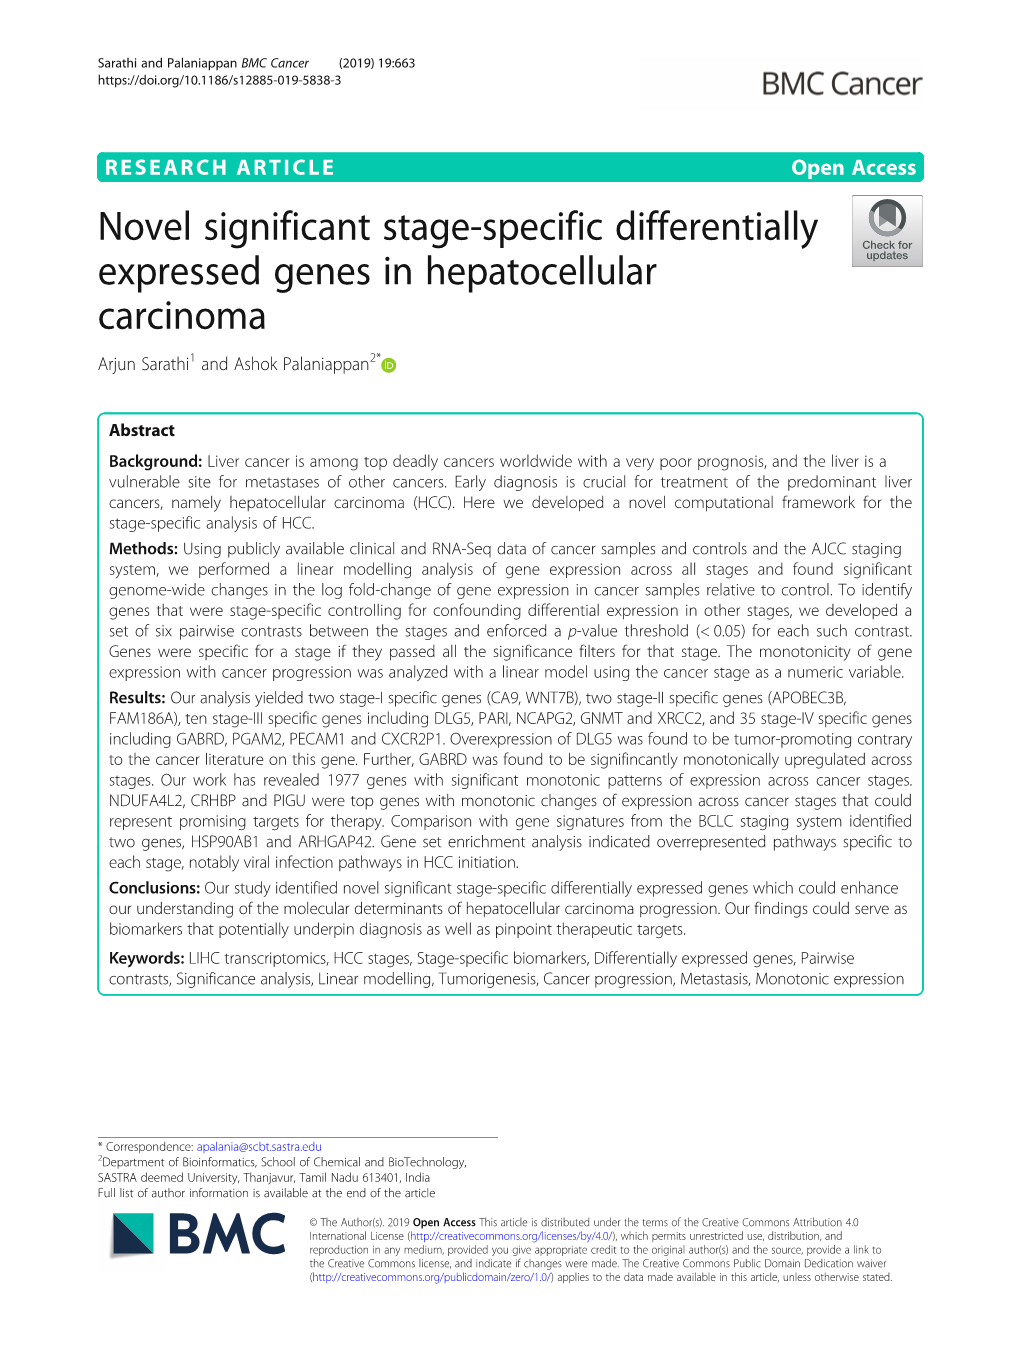 Novel Significant Stage-Specific Differentially Expressed Genes in Hepatocellular Carcinoma Arjun Sarathi1 and Ashok Palaniappan2*